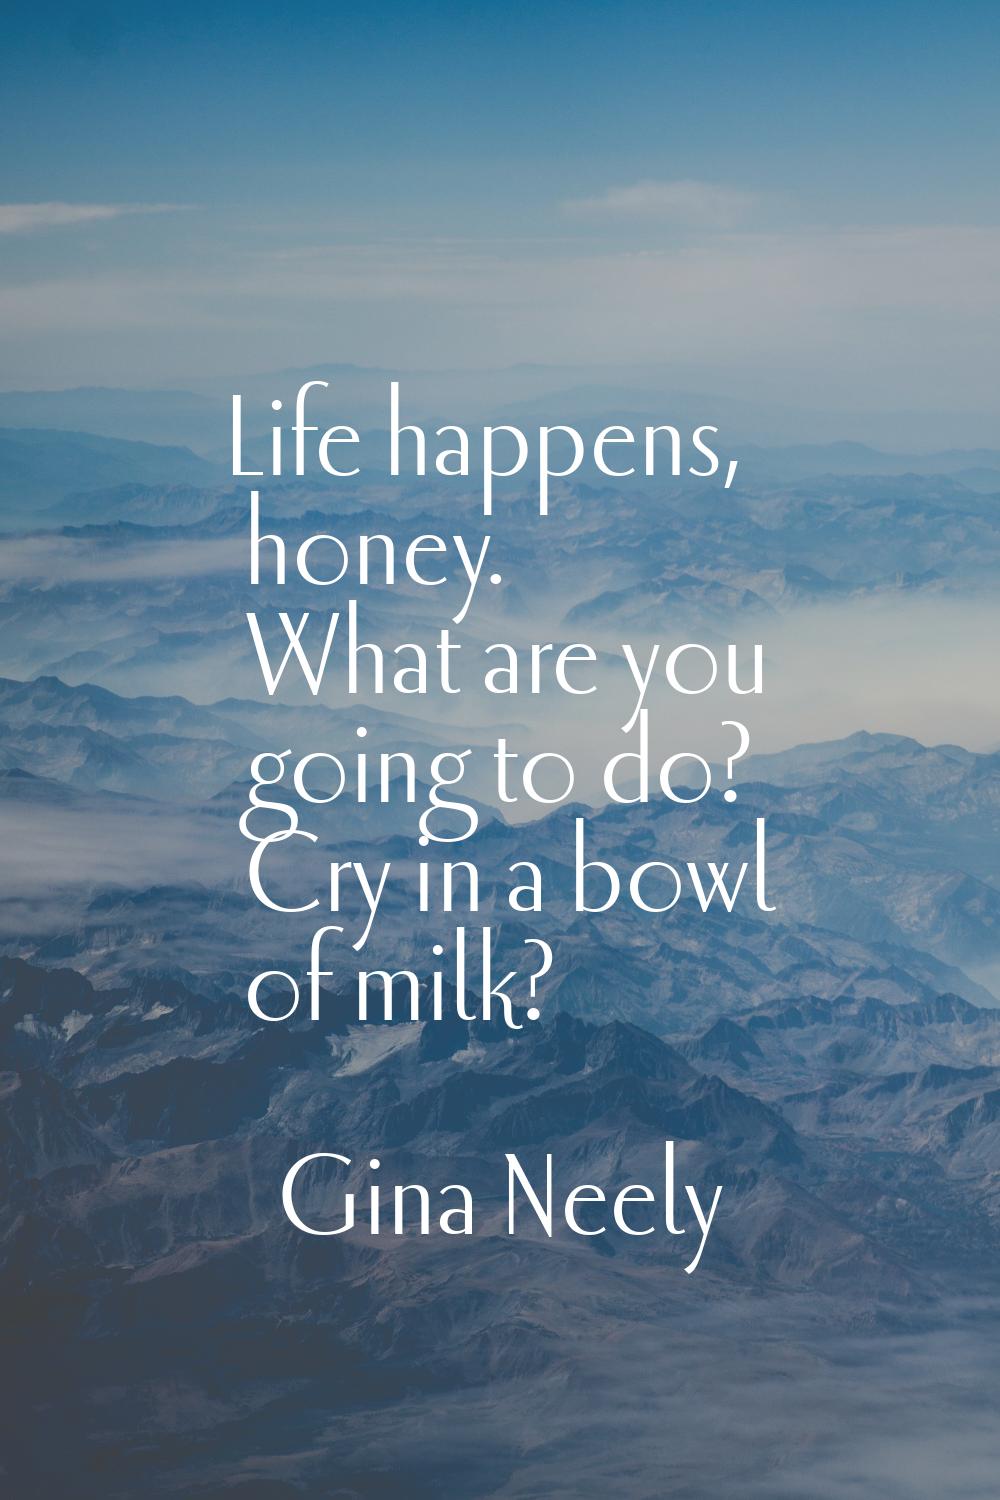 Life happens, honey. What are you going to do? Cry in a bowl of milk?